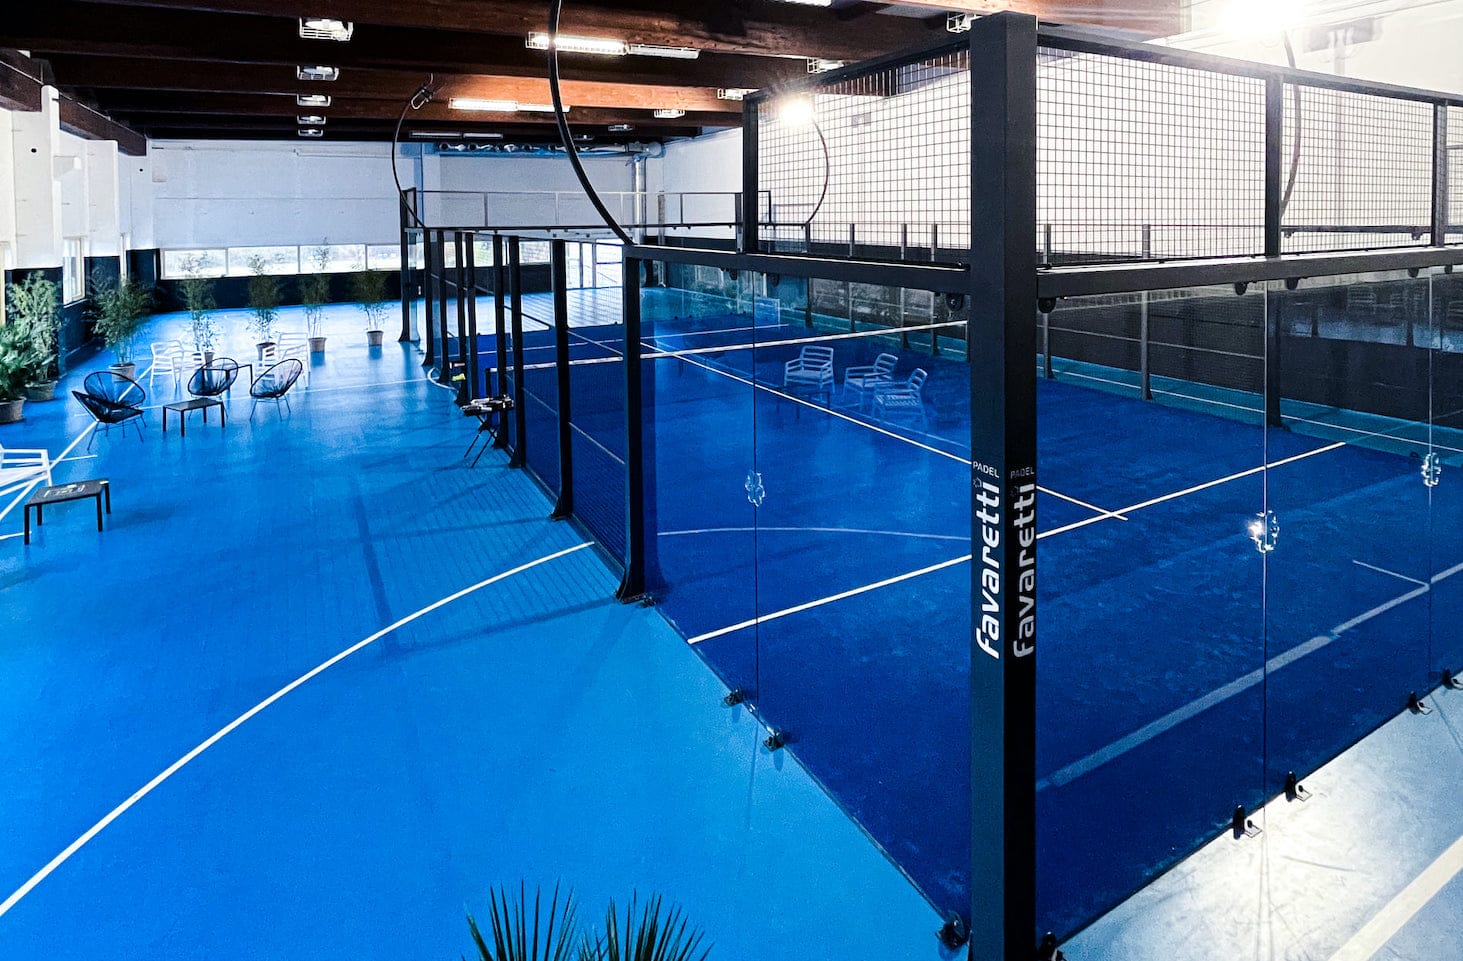 What is Padel?, Where Can you Padel?